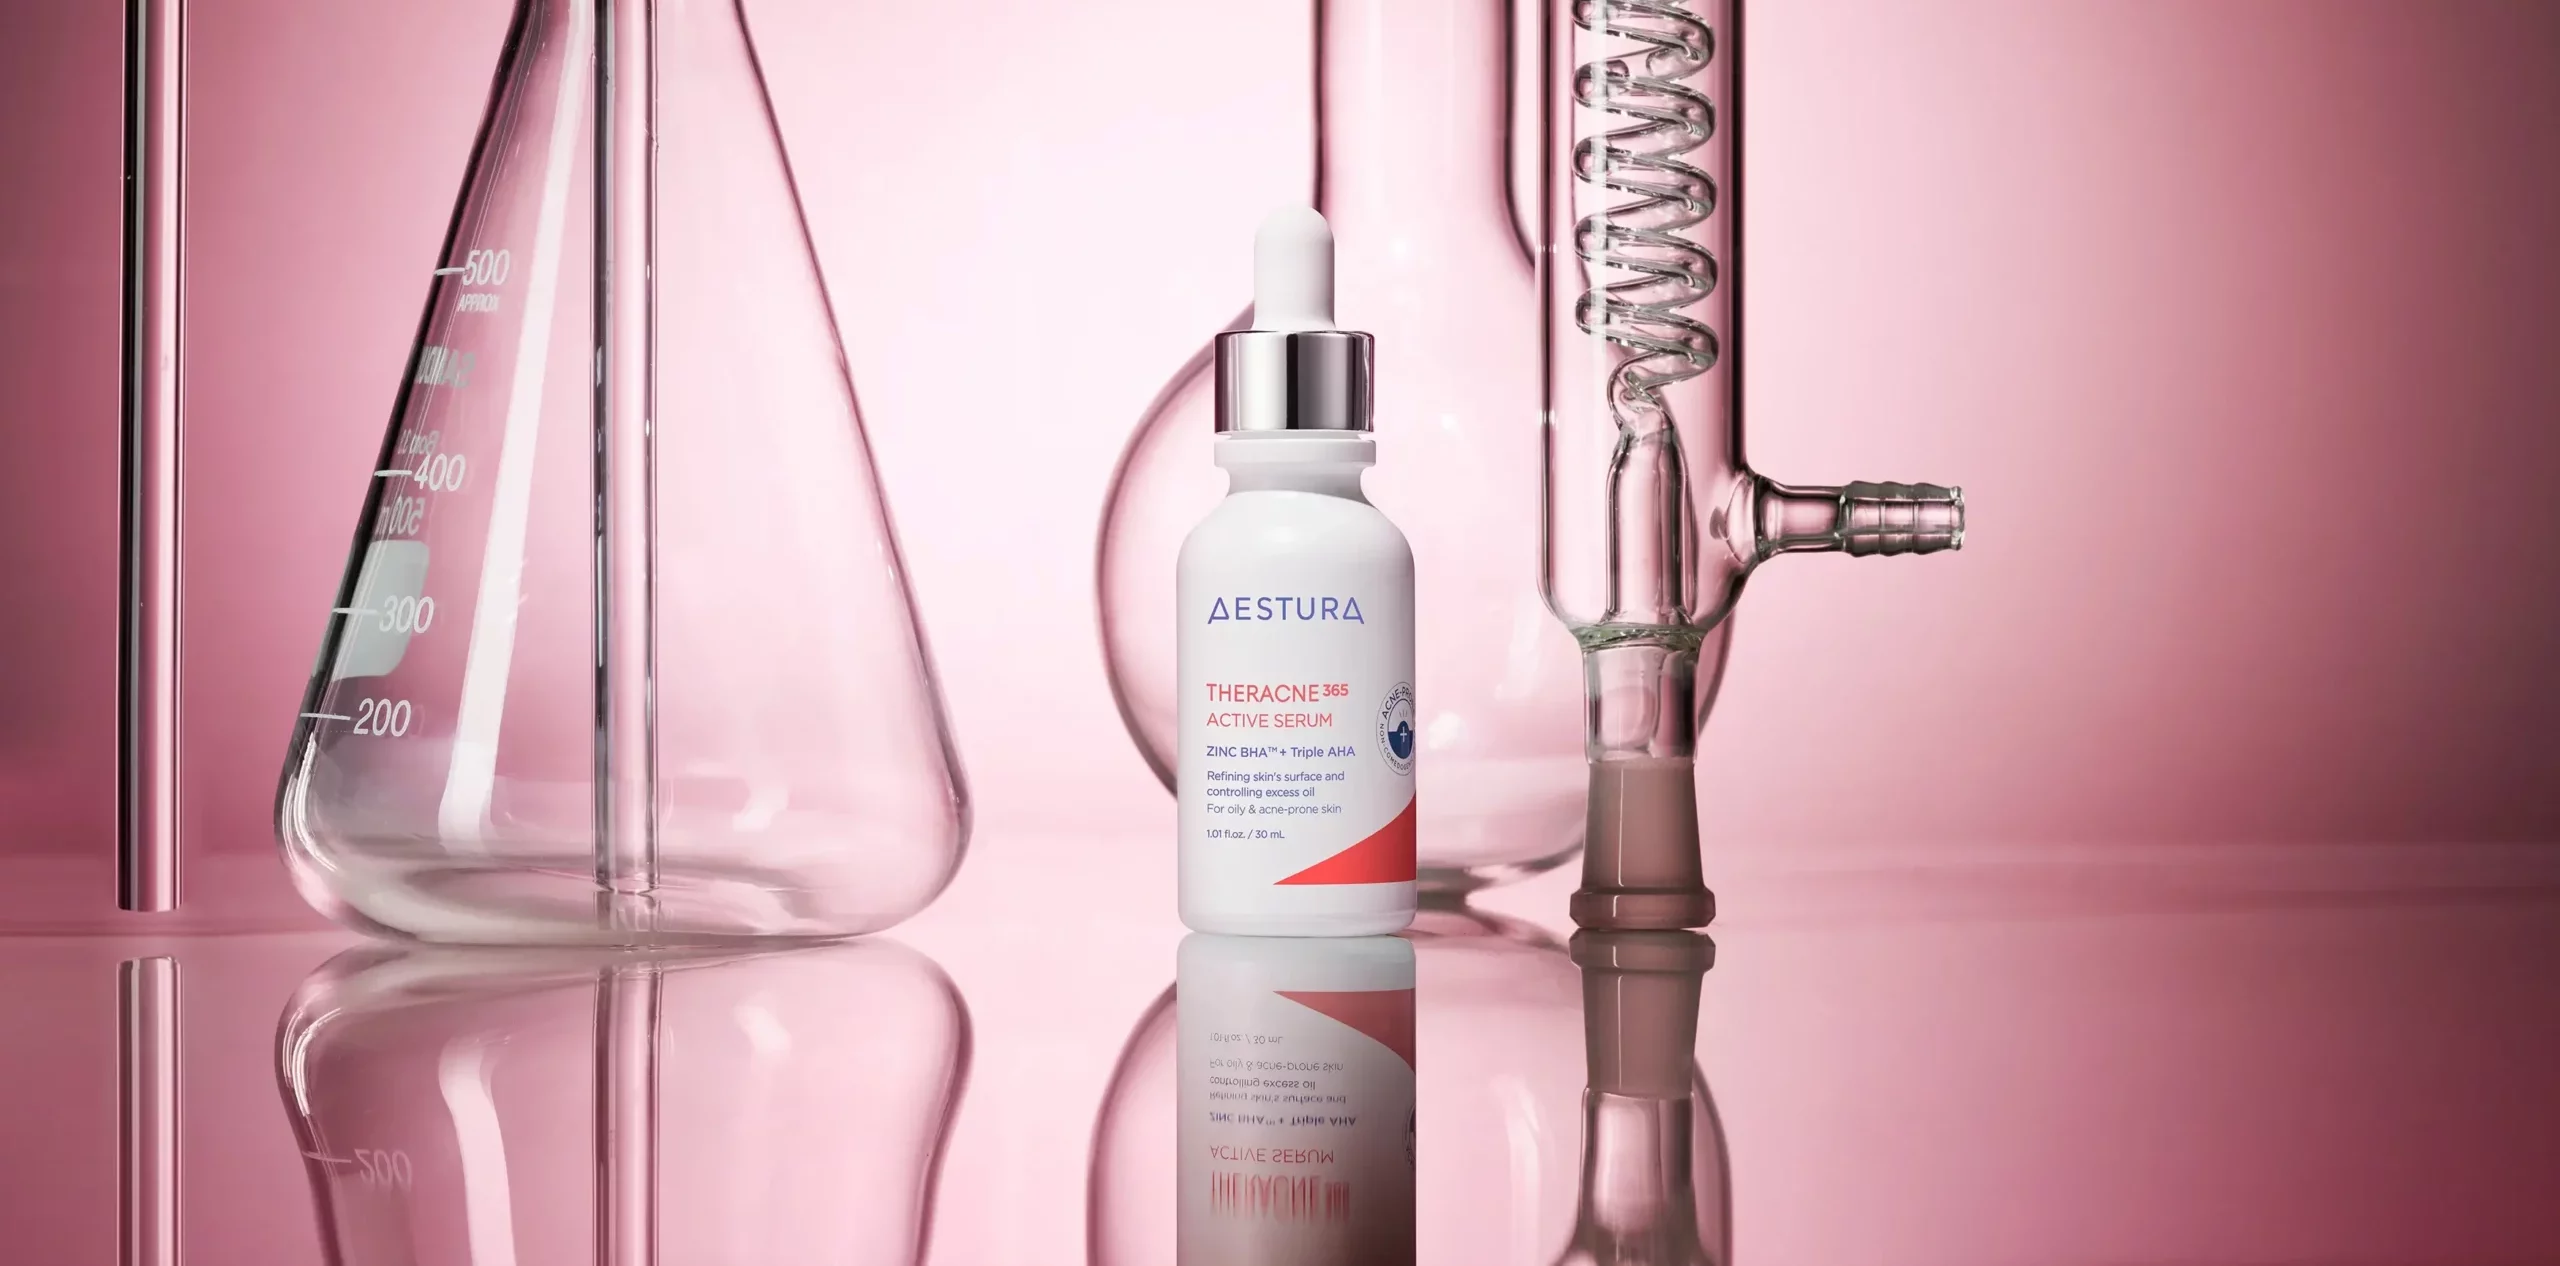 Theracne 365 Active Serum – new from AESTURA